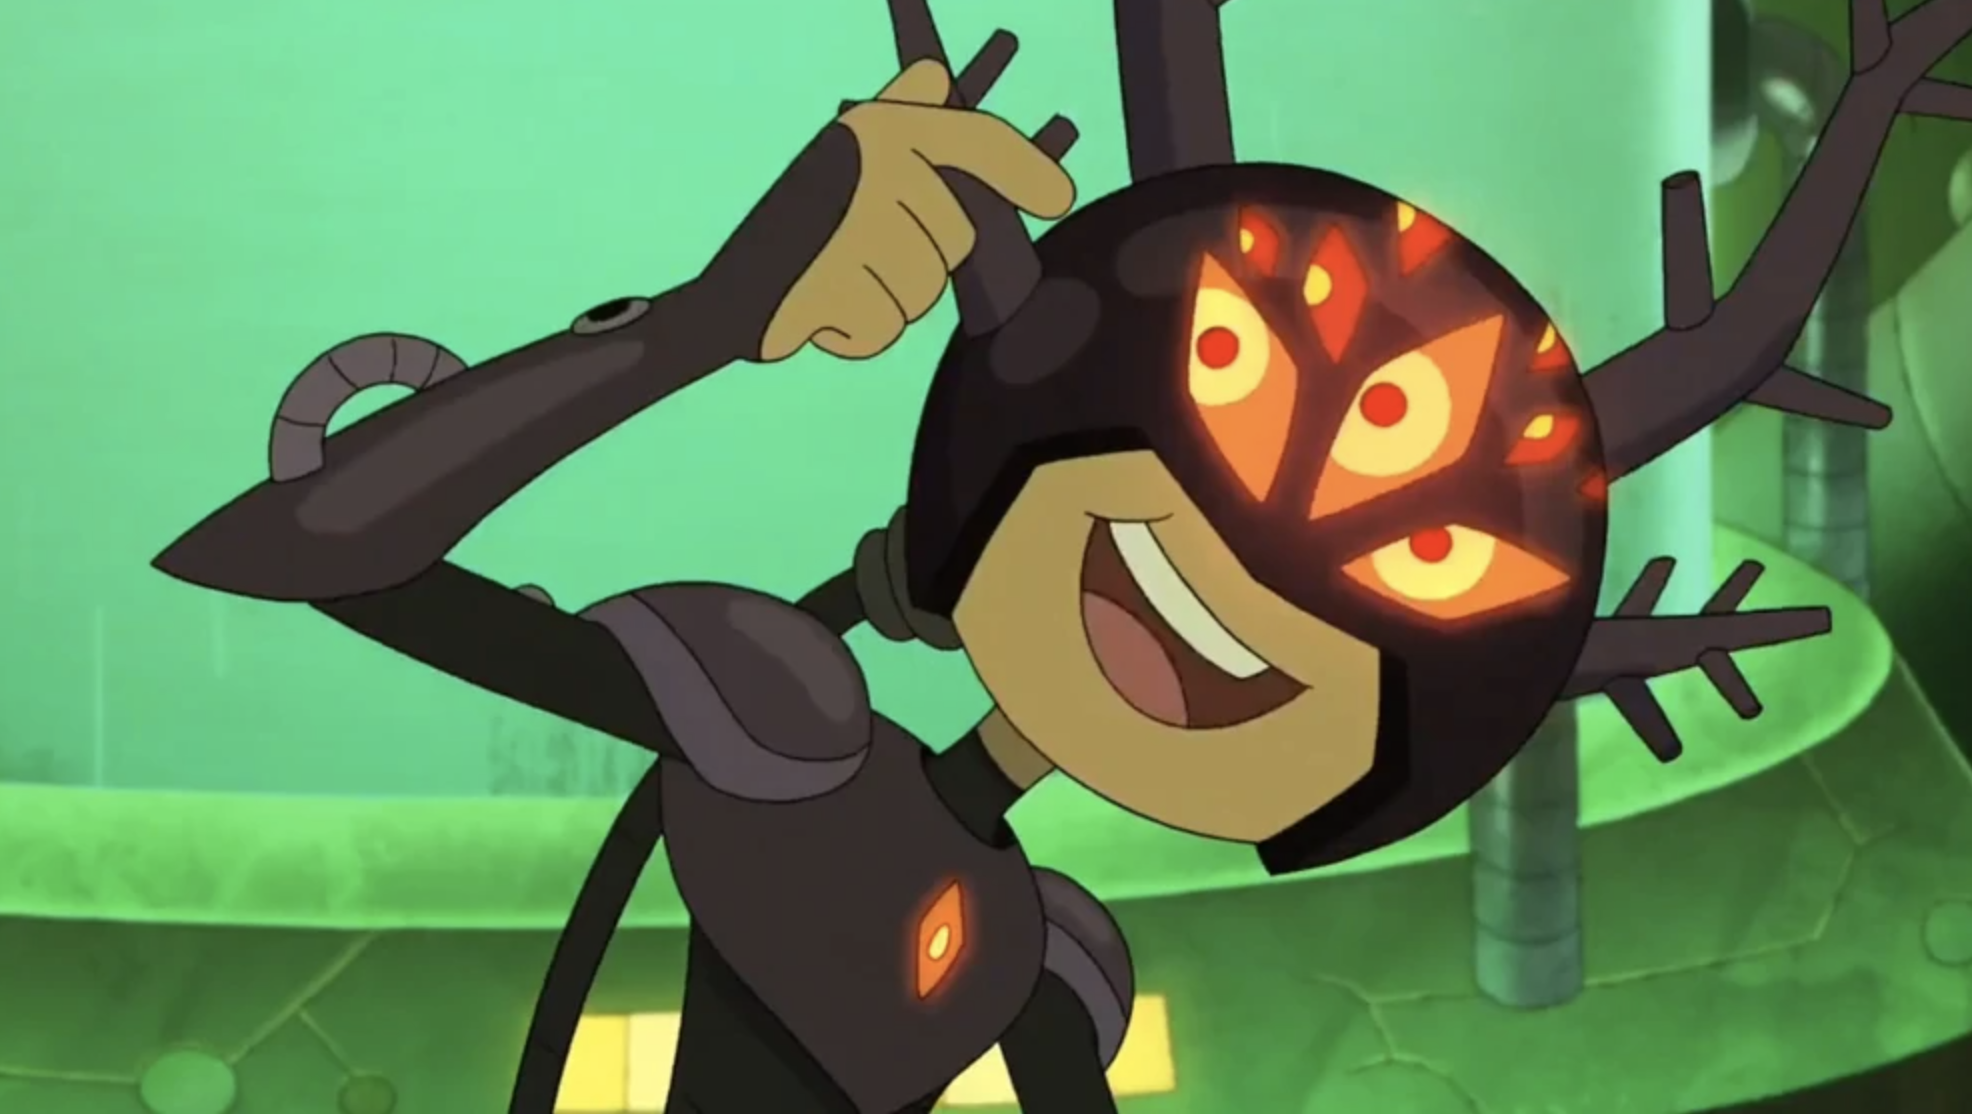 The Core possesses Marcy through a black helmet with multiple glowing orange eyes. 